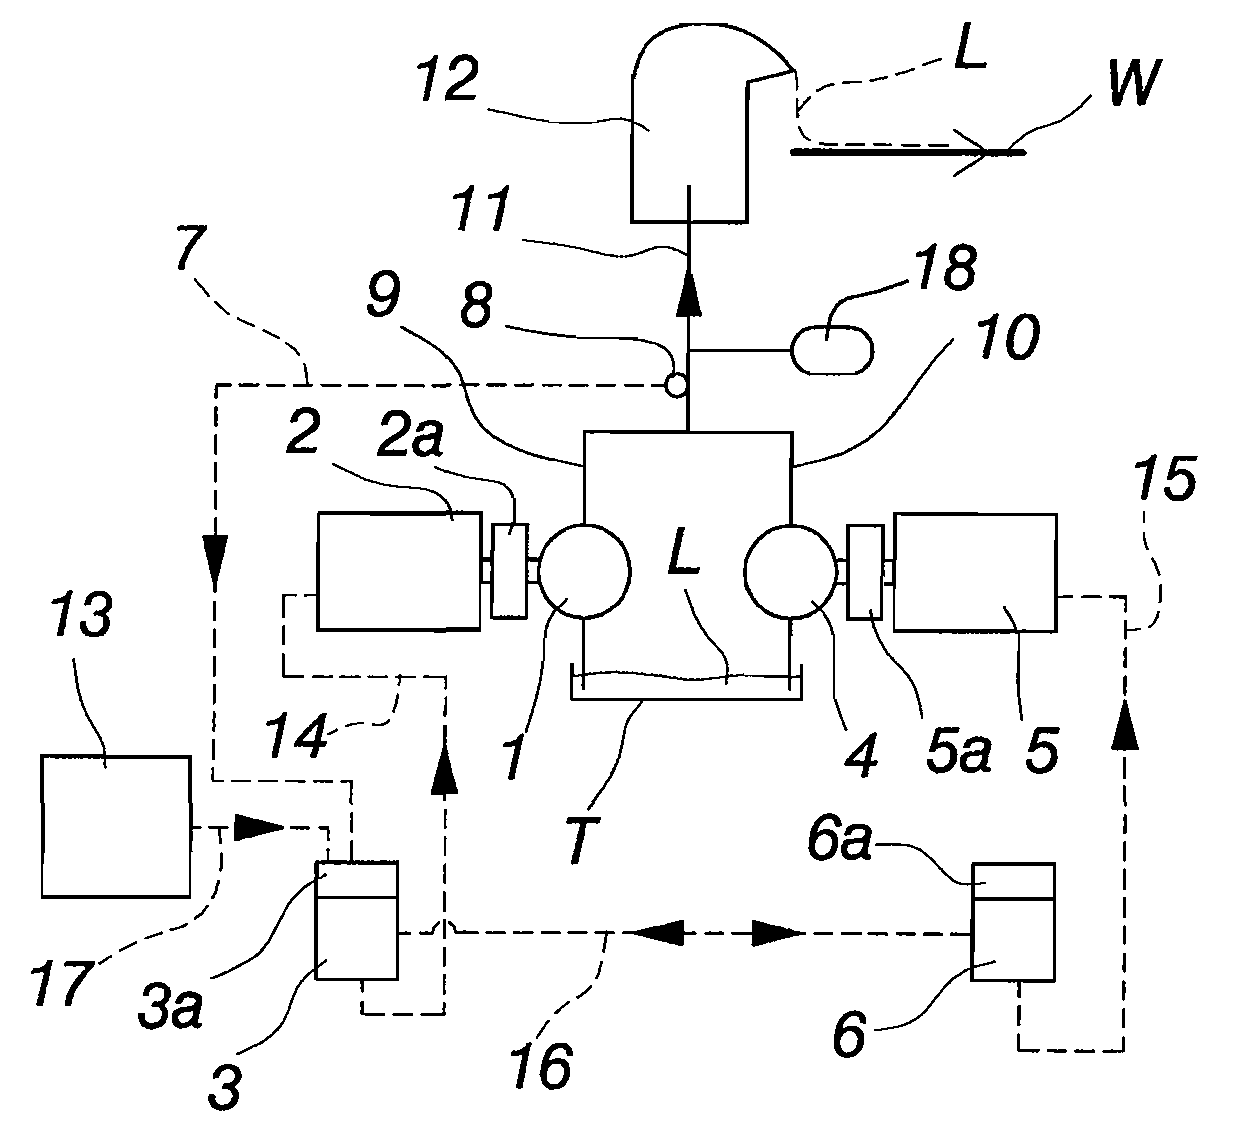 Method for Supplying a Chemical or Chemical Compound in a Fibrous Web Machine and an Apparatus for Implementing the Method